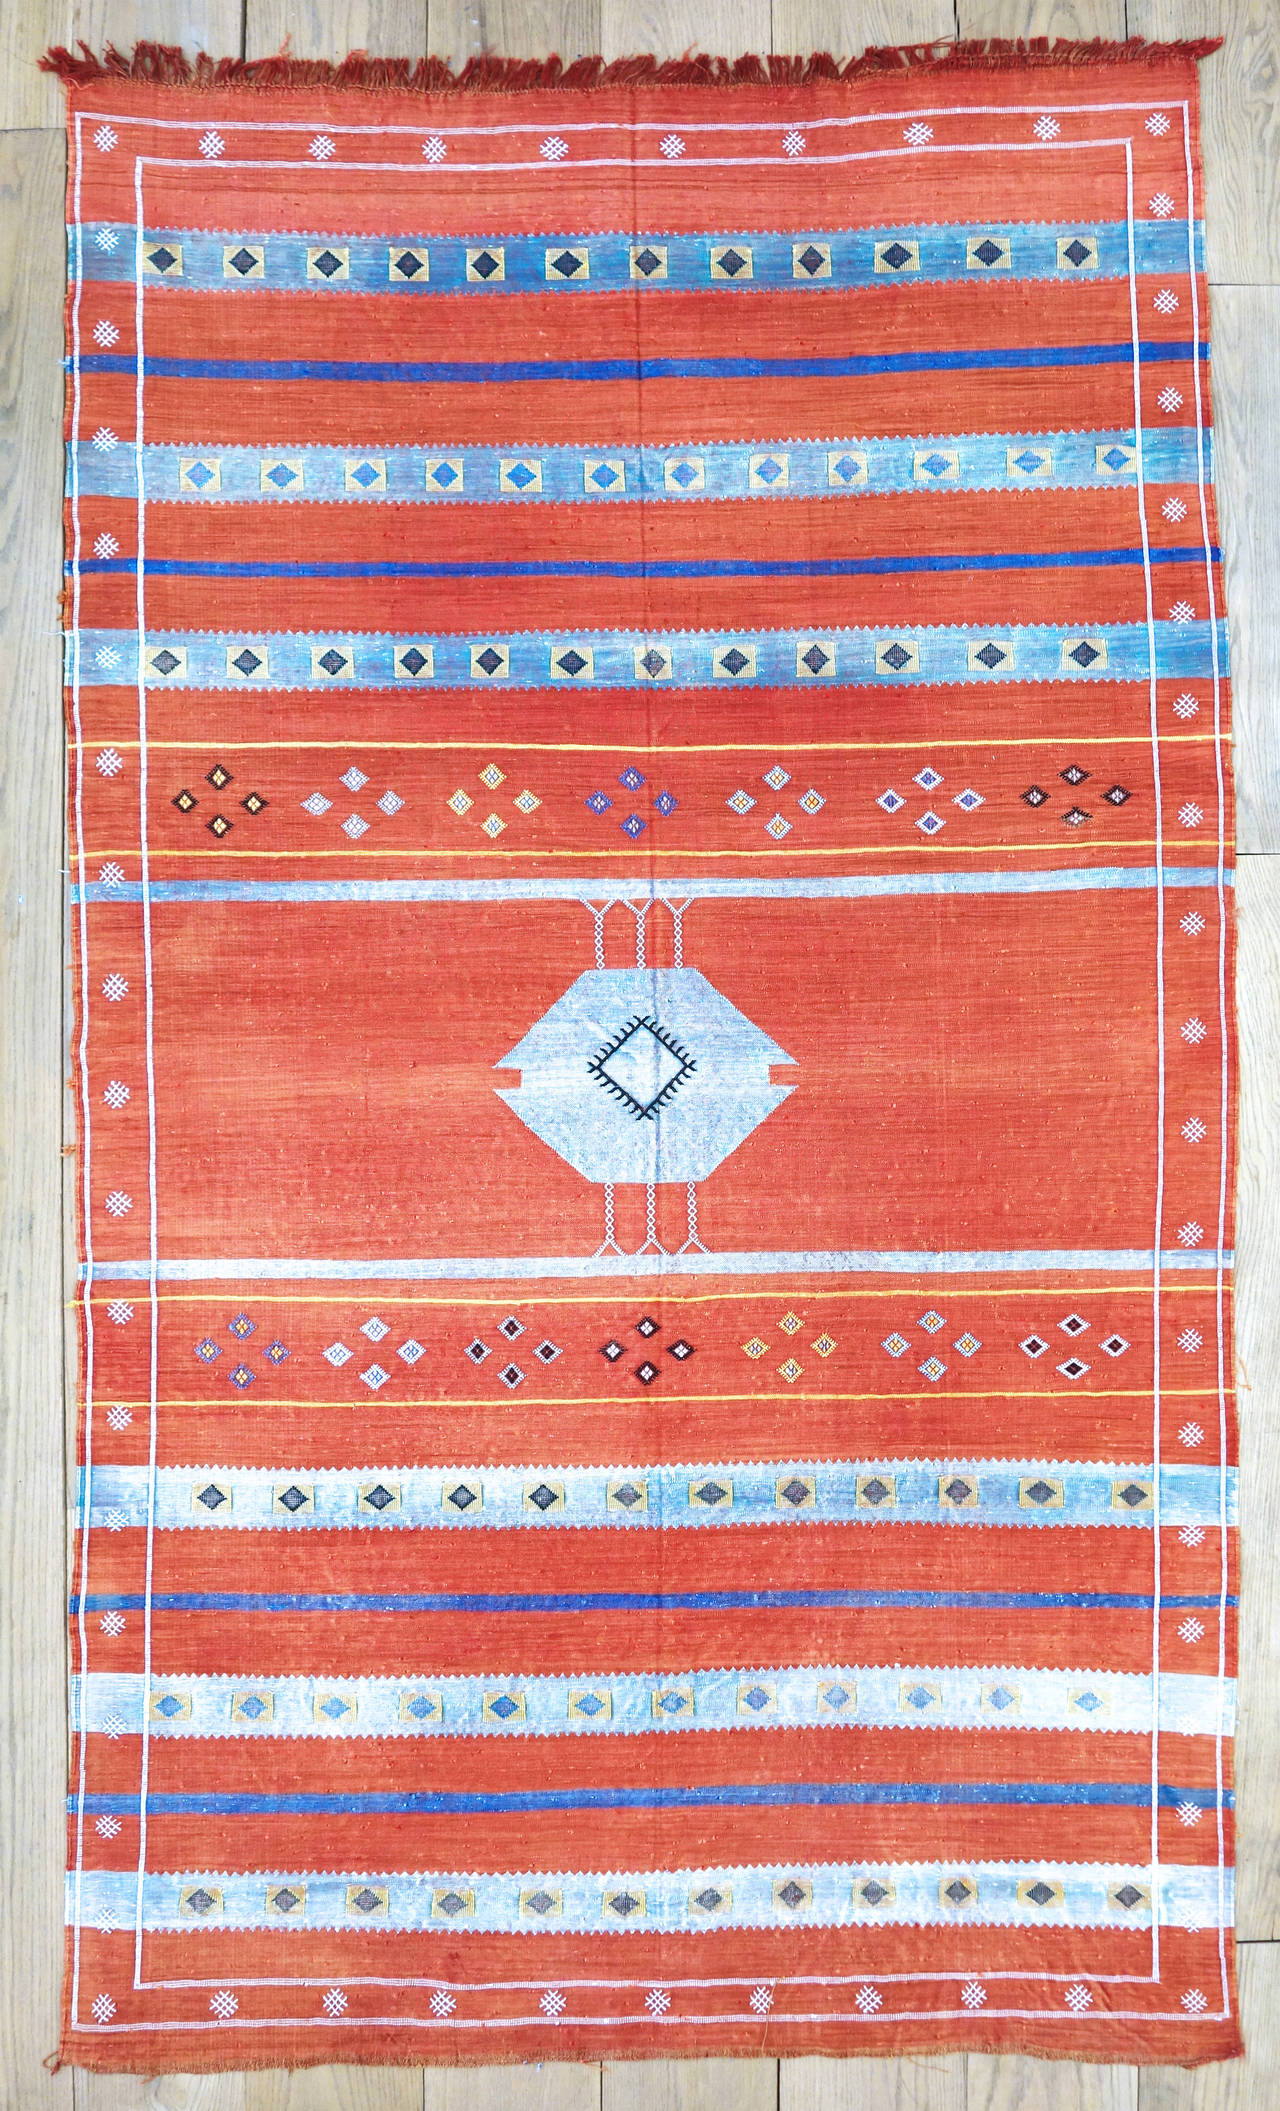 For centuries, the Berbers have woven a kind of silk from the agave plant, pounding and soaking the leaves until the fibers separate, then spinning the fibers by hand to create an extremely durable thread. This is woven on looms with other